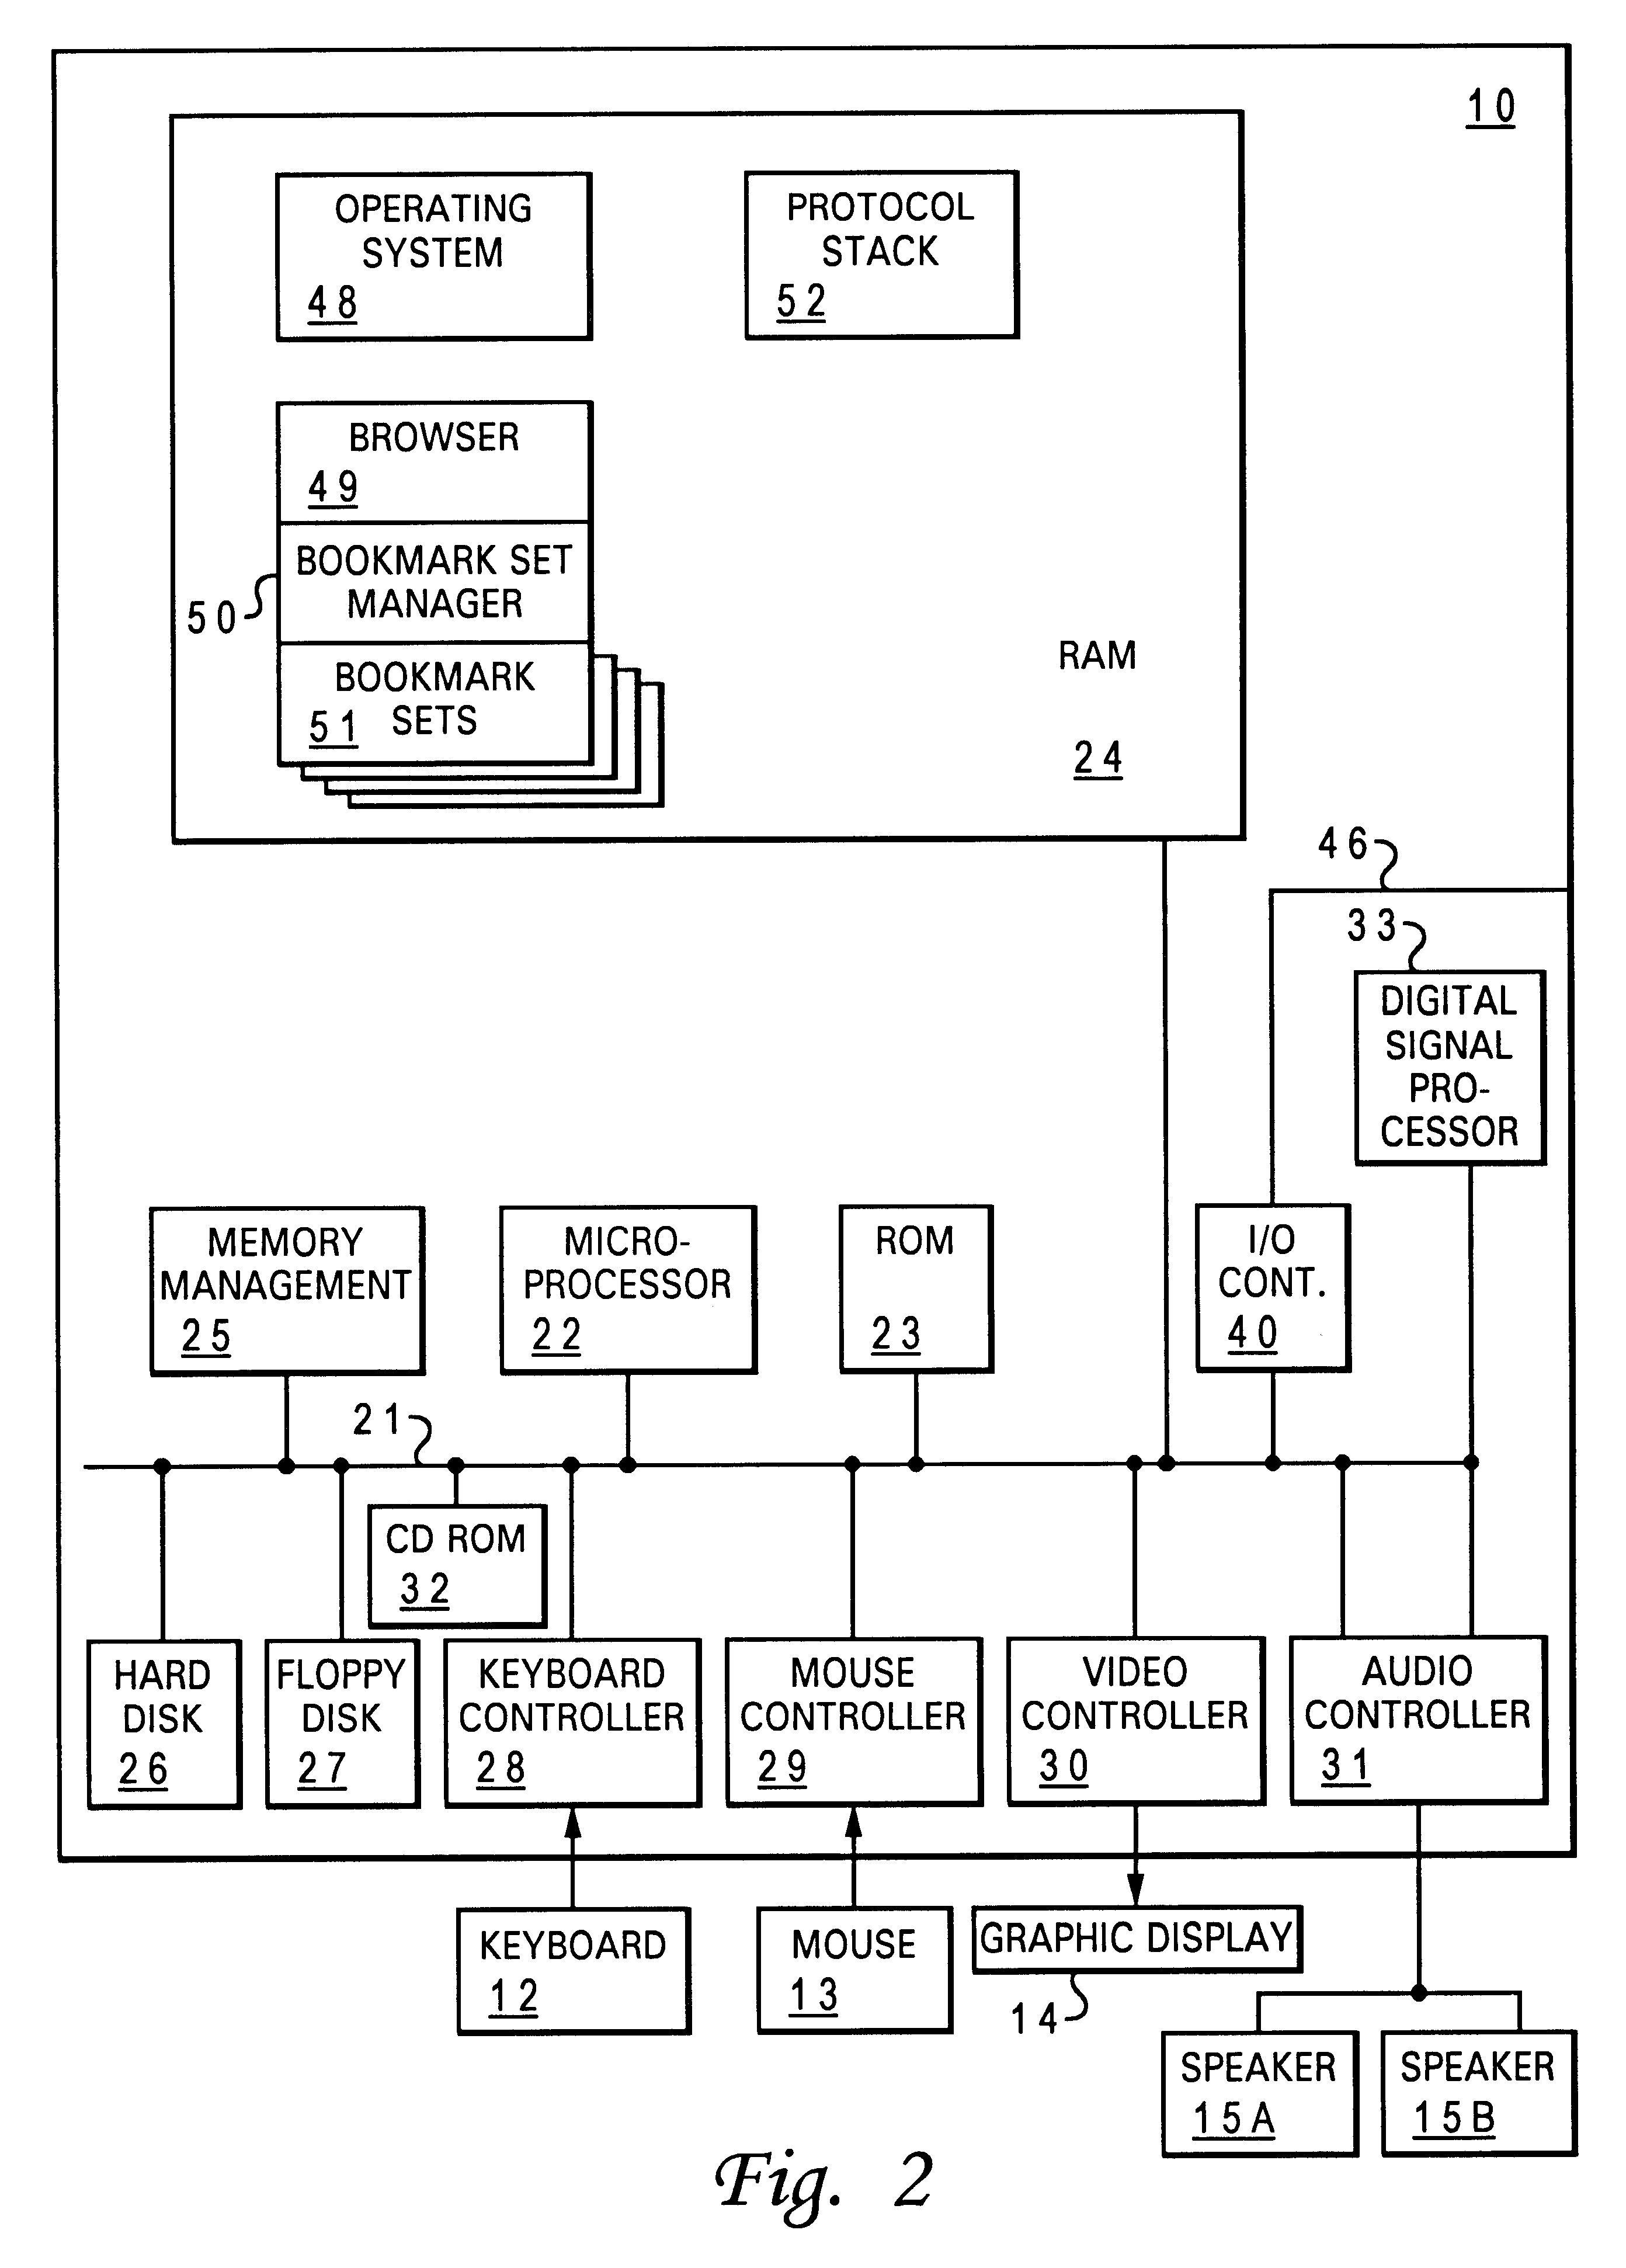 Adaptive timeout value setting for distributed computing environment (DCE) applications